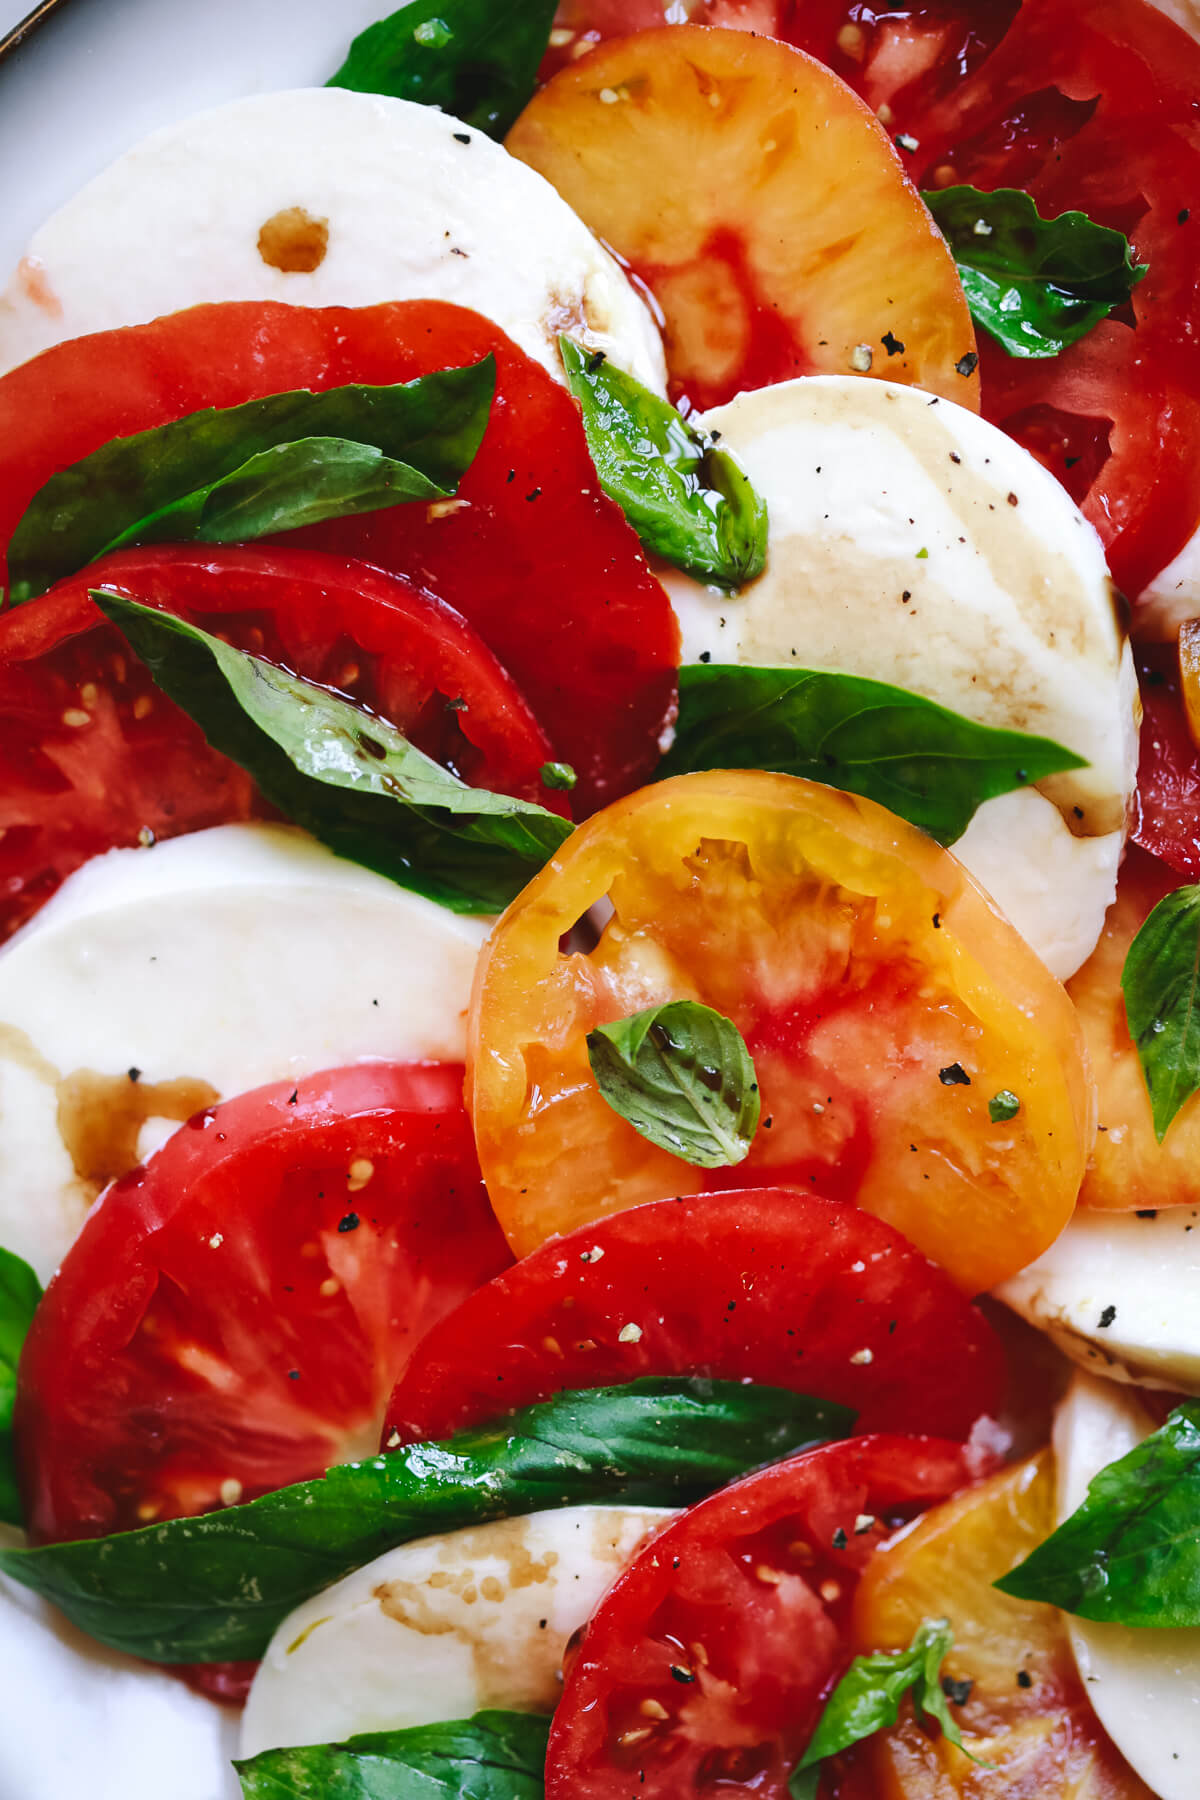 Red and yellow heirloom tomatoes, mozzarella slices, and basil leaves close-up photo depicting a delicious Caprese salad. 